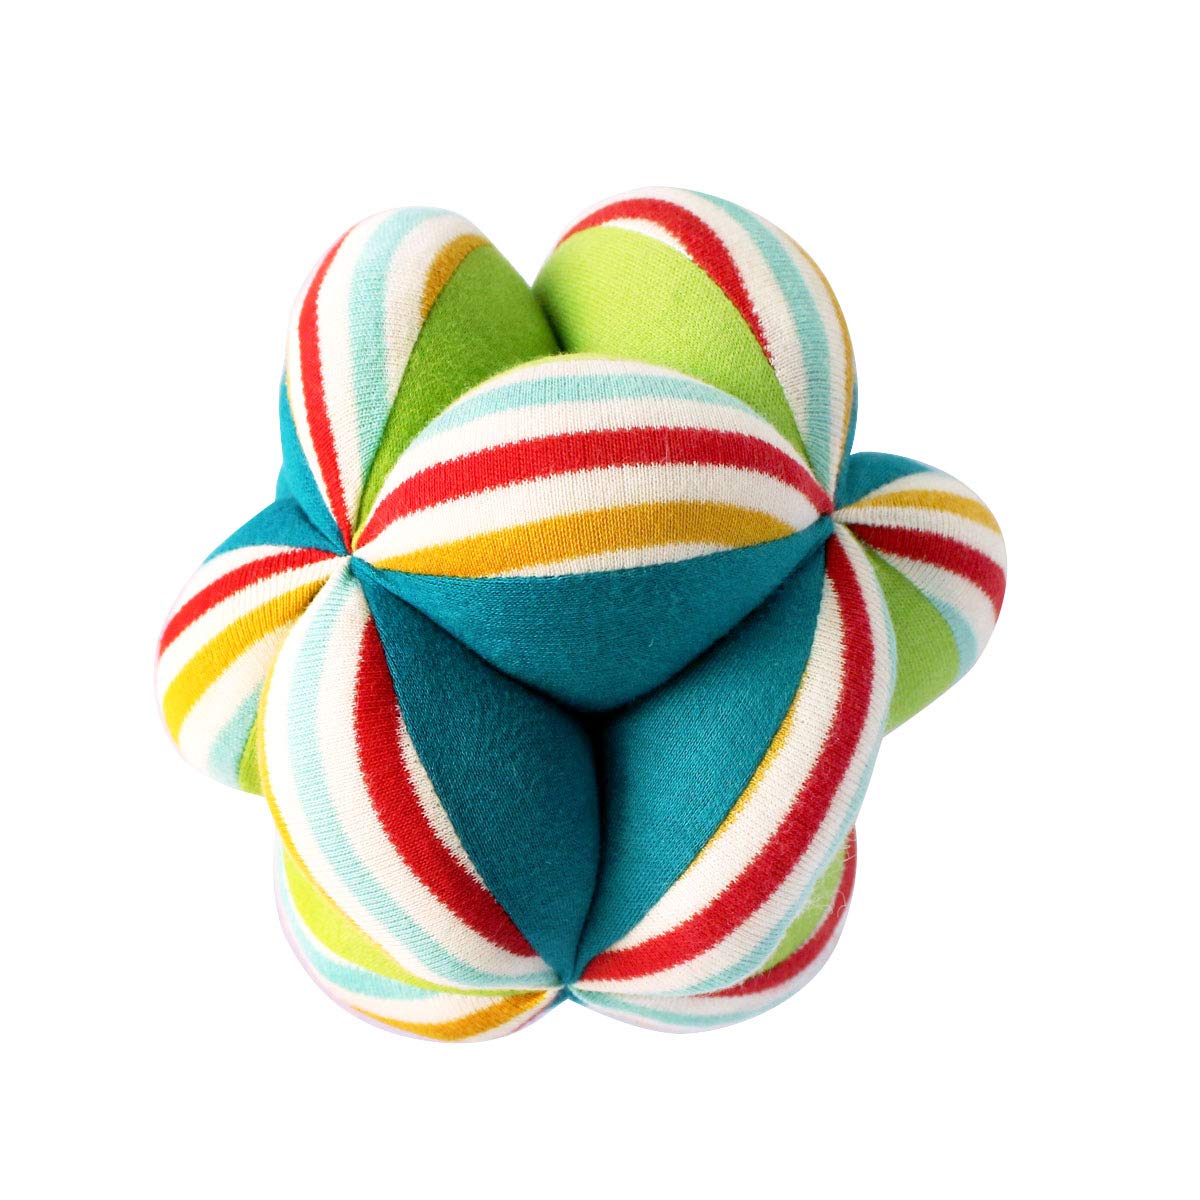 Shumee Plush Fabric Clutching Soft Ball with Rattle